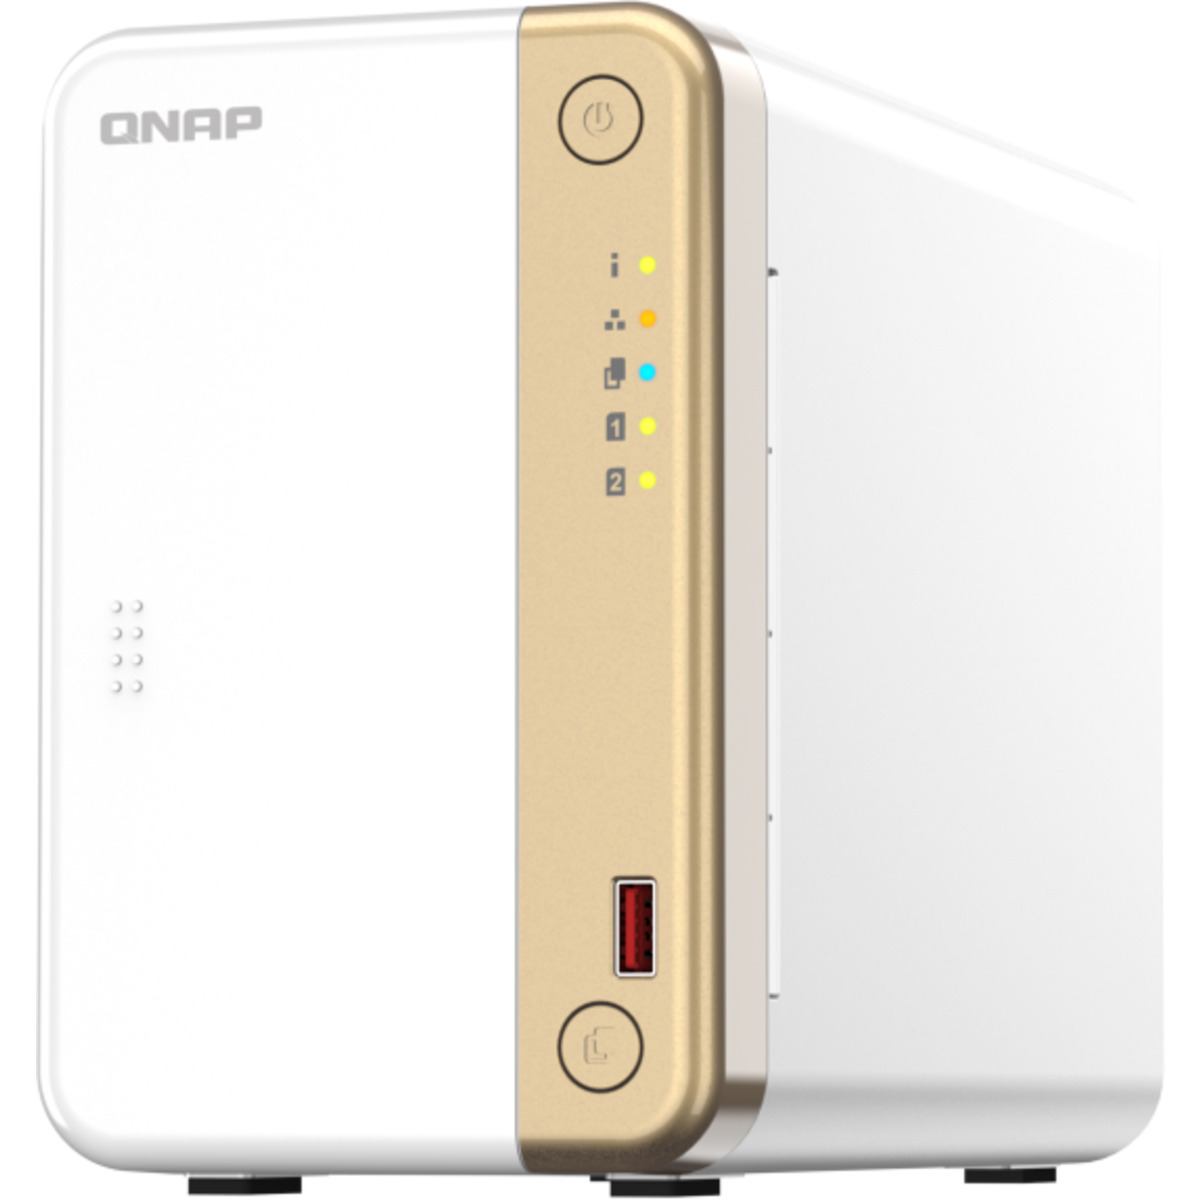 QNAP TS-262 44tb 2-Bay Desktop Personal / Basic Home / Small Office NAS - Network Attached Storage Device 2x22tb Western Digital Ultrastar HC580 WUH722422ALE6L4 3.5 7200rpm SATA 6Gb/s HDD ENTERPRISE Class Drives Installed - Burn-In Tested TS-262